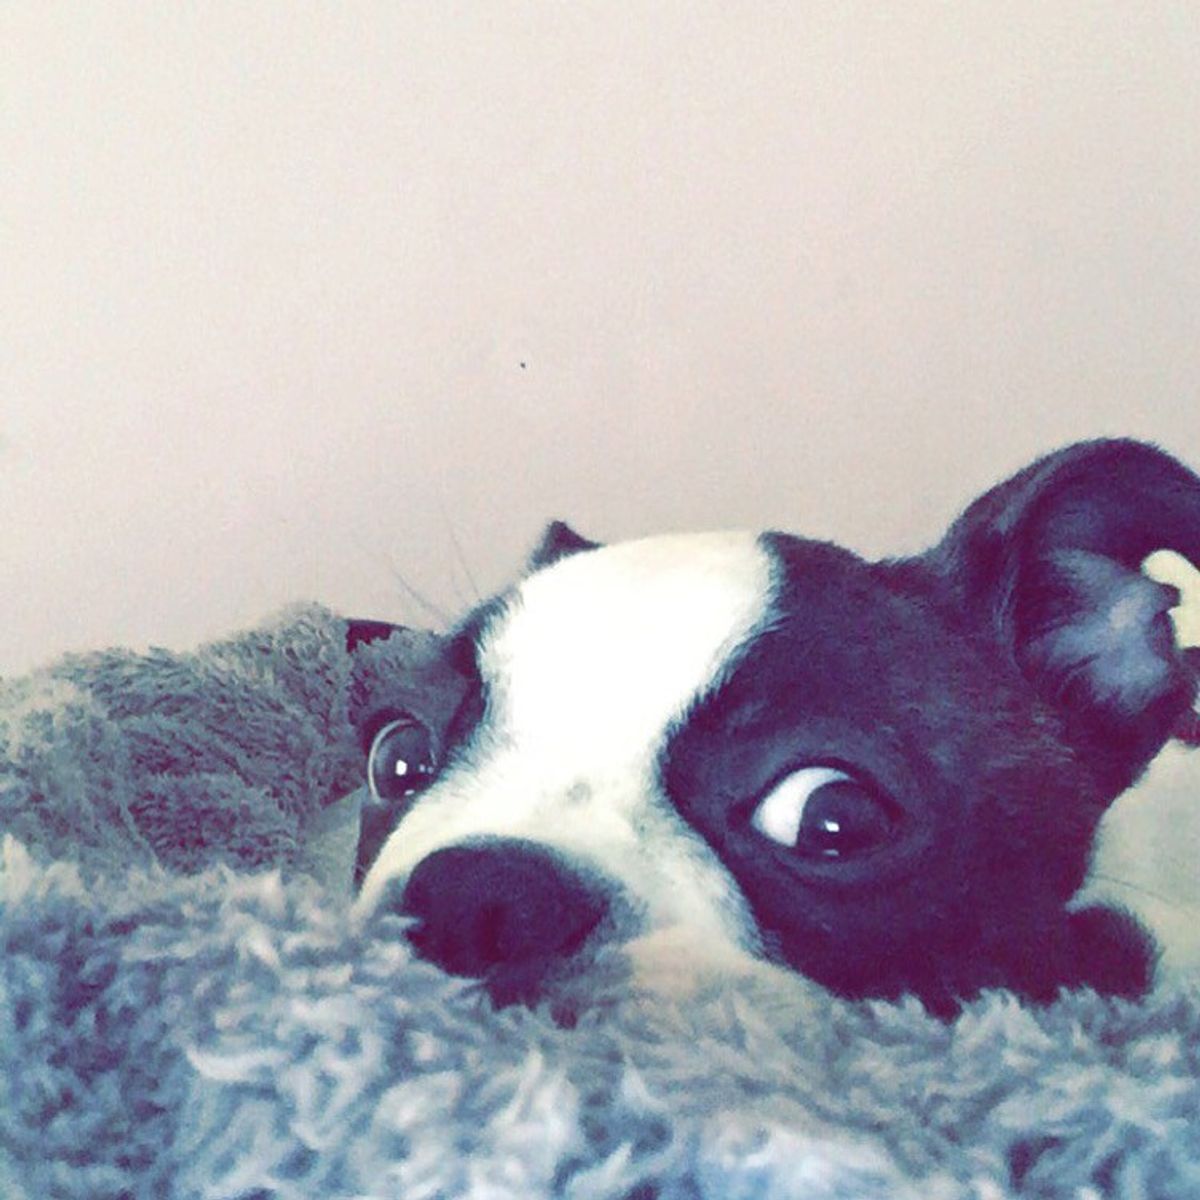 6 Reasons Why Boston Terriers Make The Best Companions